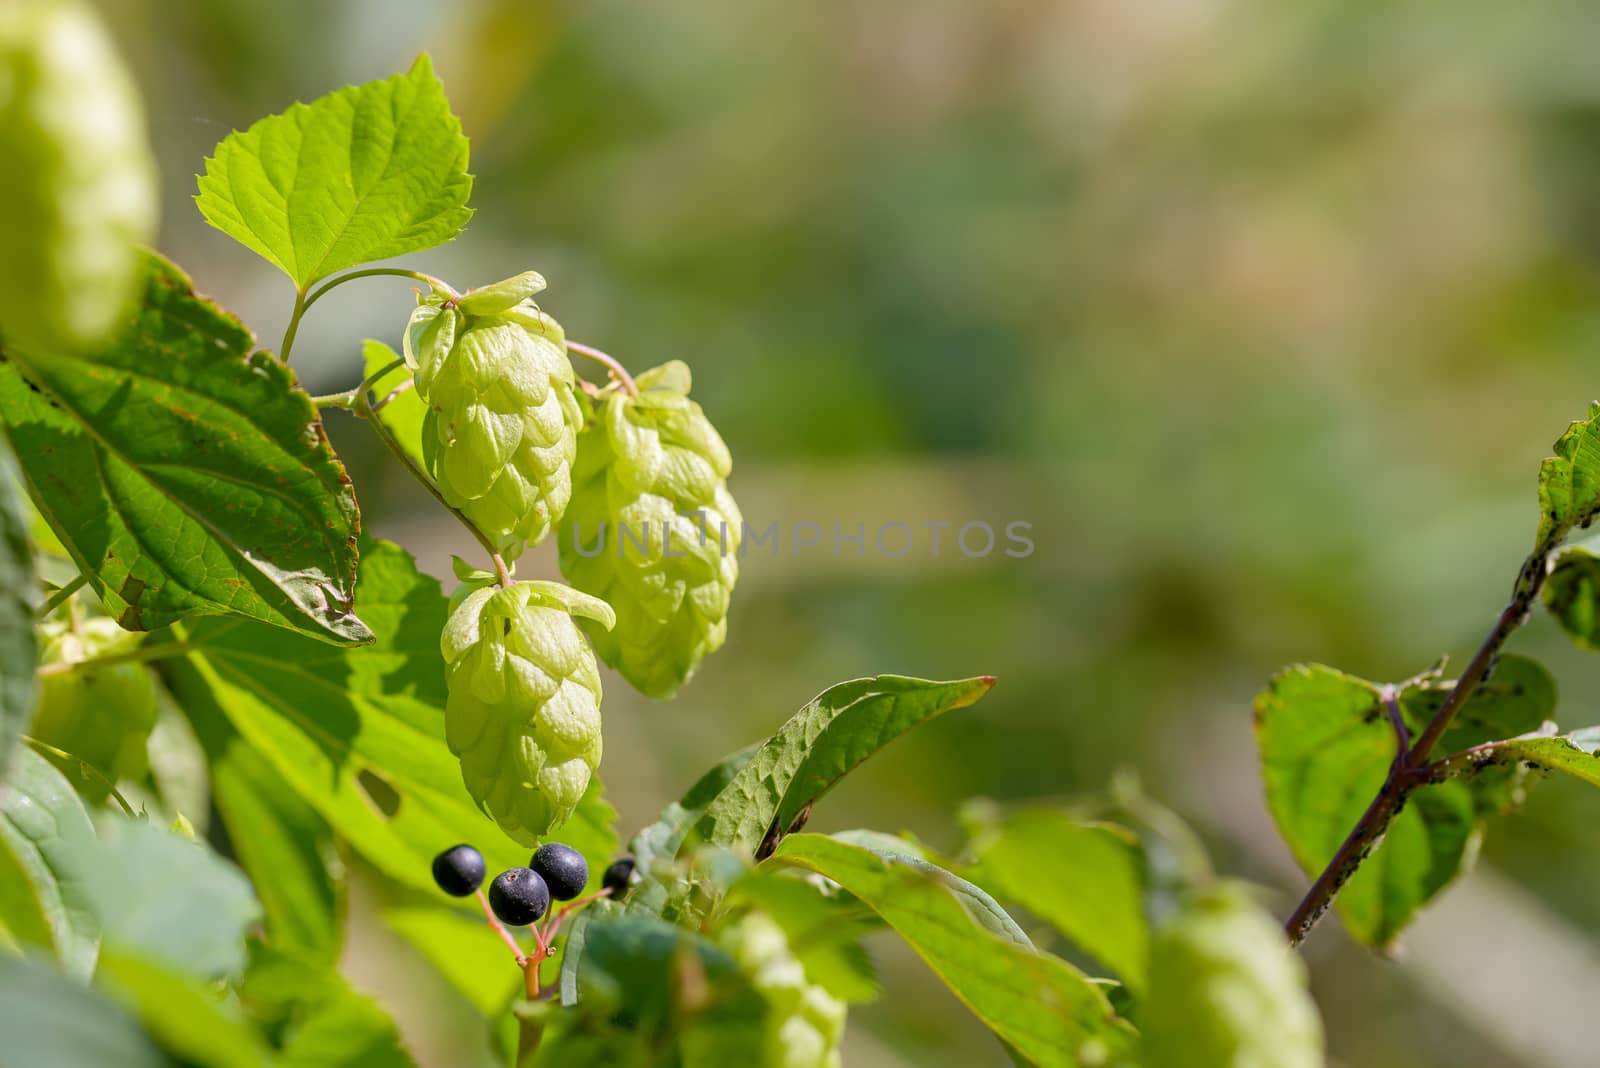 Female flowers of Humulus lupulus, also called hops, in the forest under the warm sun